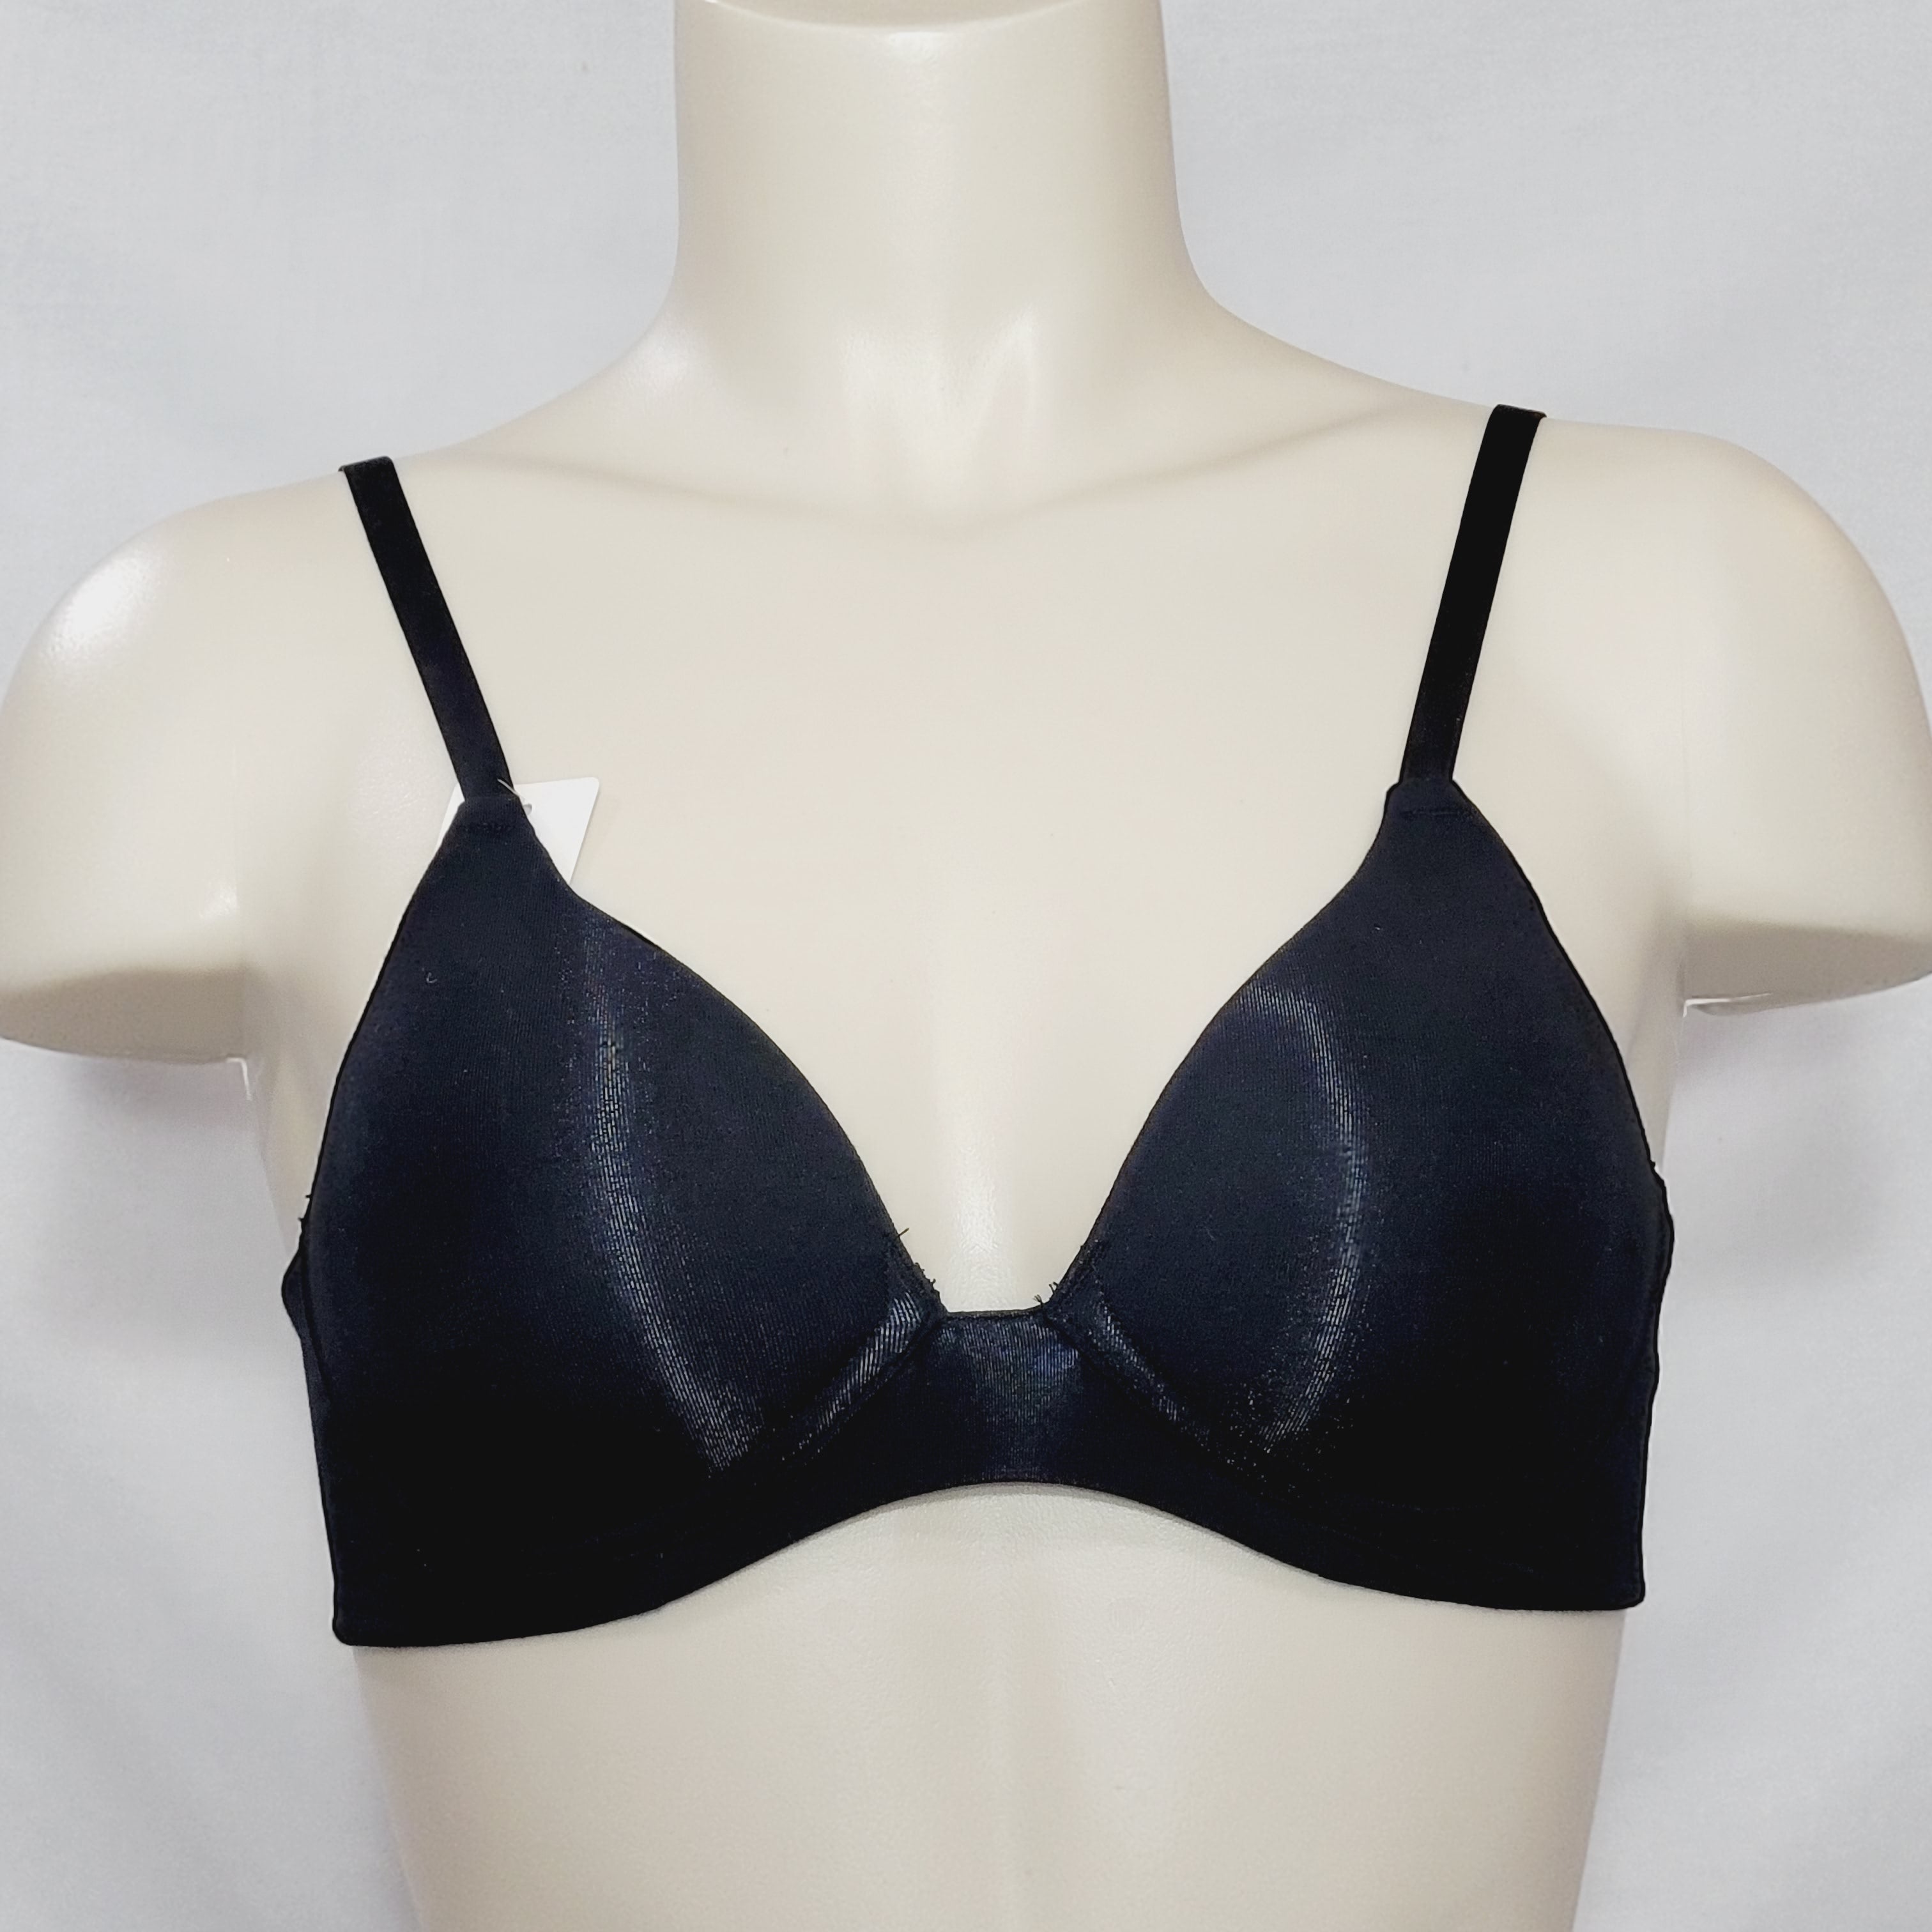 GILLIGAN & O'MALLEY Light Gray Wire Free Comfort Bra Size 38D NWOT